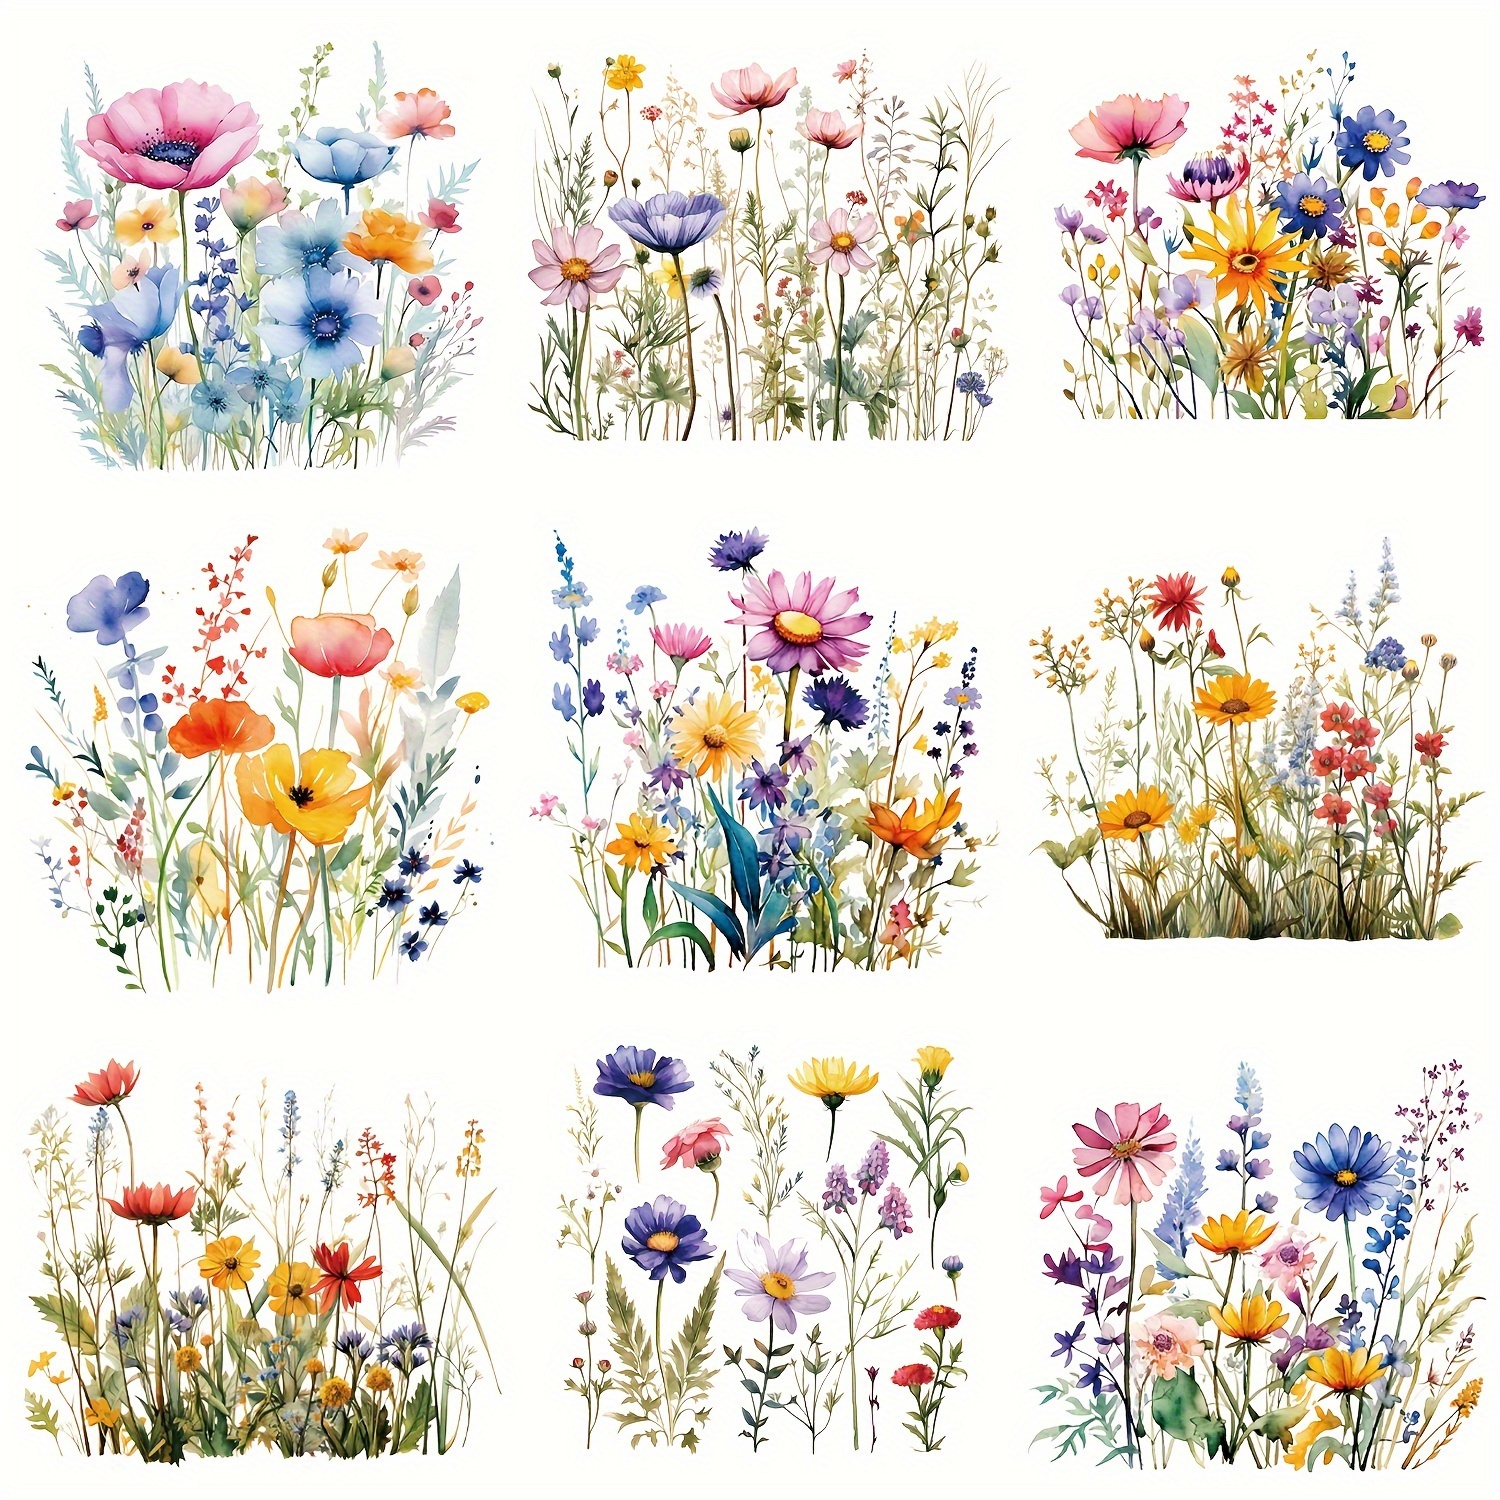 

9pcs Colorful Wild Flowers Iron-on Transfers For T-shirts, Heat Transfer Vinyl Decals, Mixed Color, Pocket Size Patches For Diy Crafts And Clothing Decoration